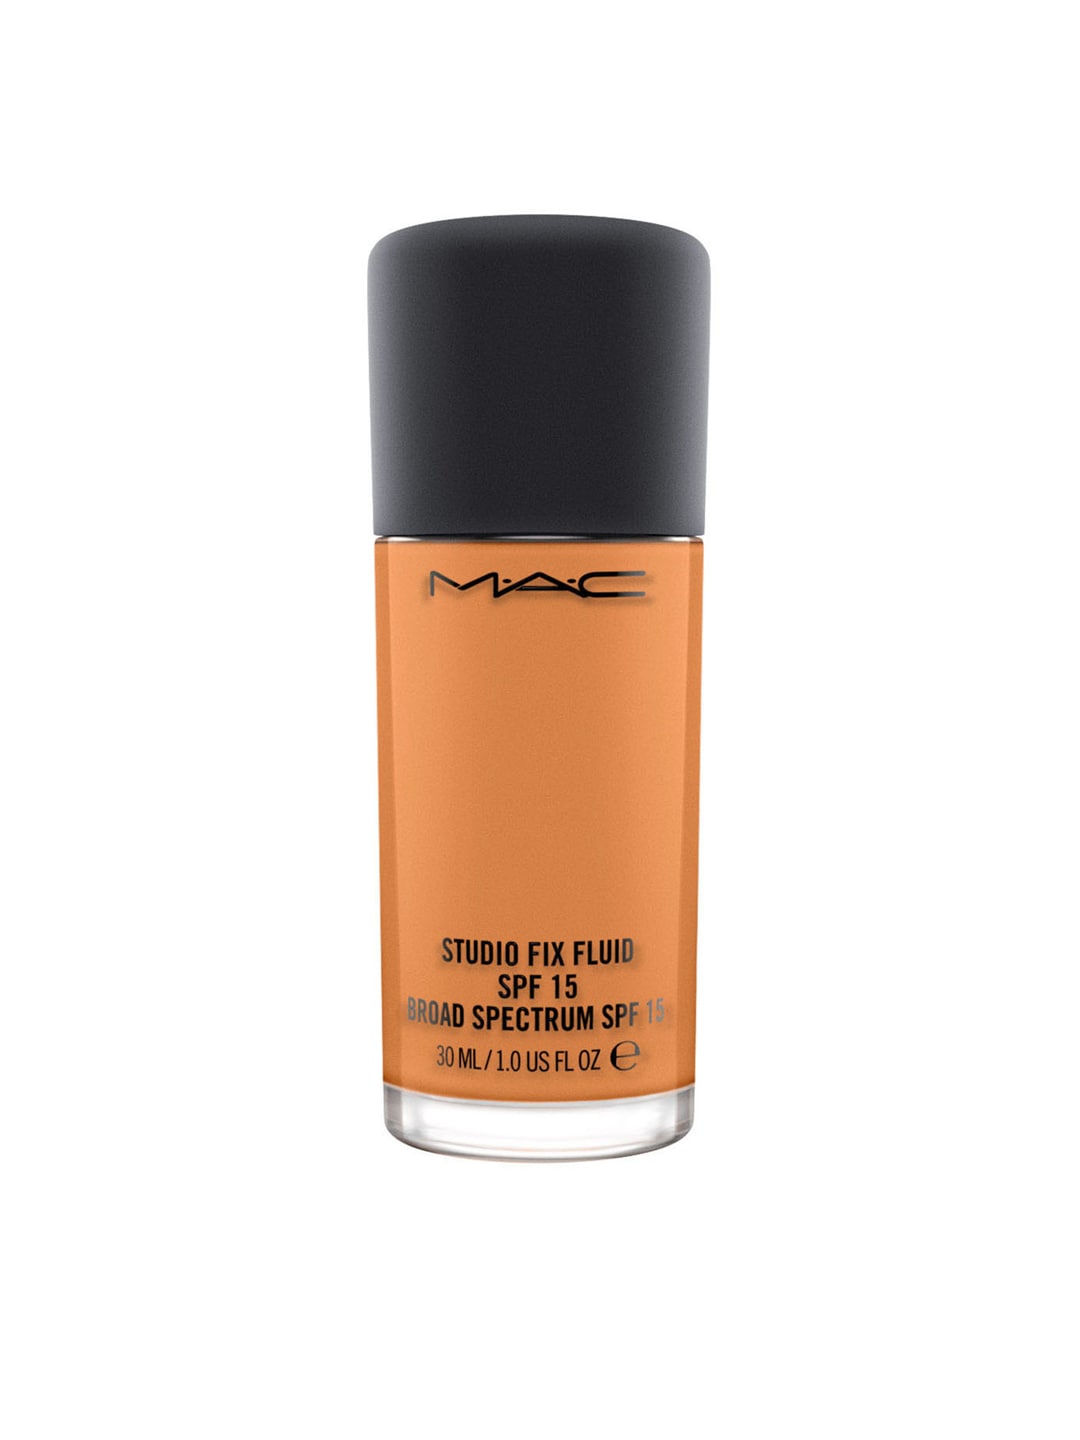 M.A.C Studio Fix Fluid Foundation with SPF 15 - NC47 30ml Price in India